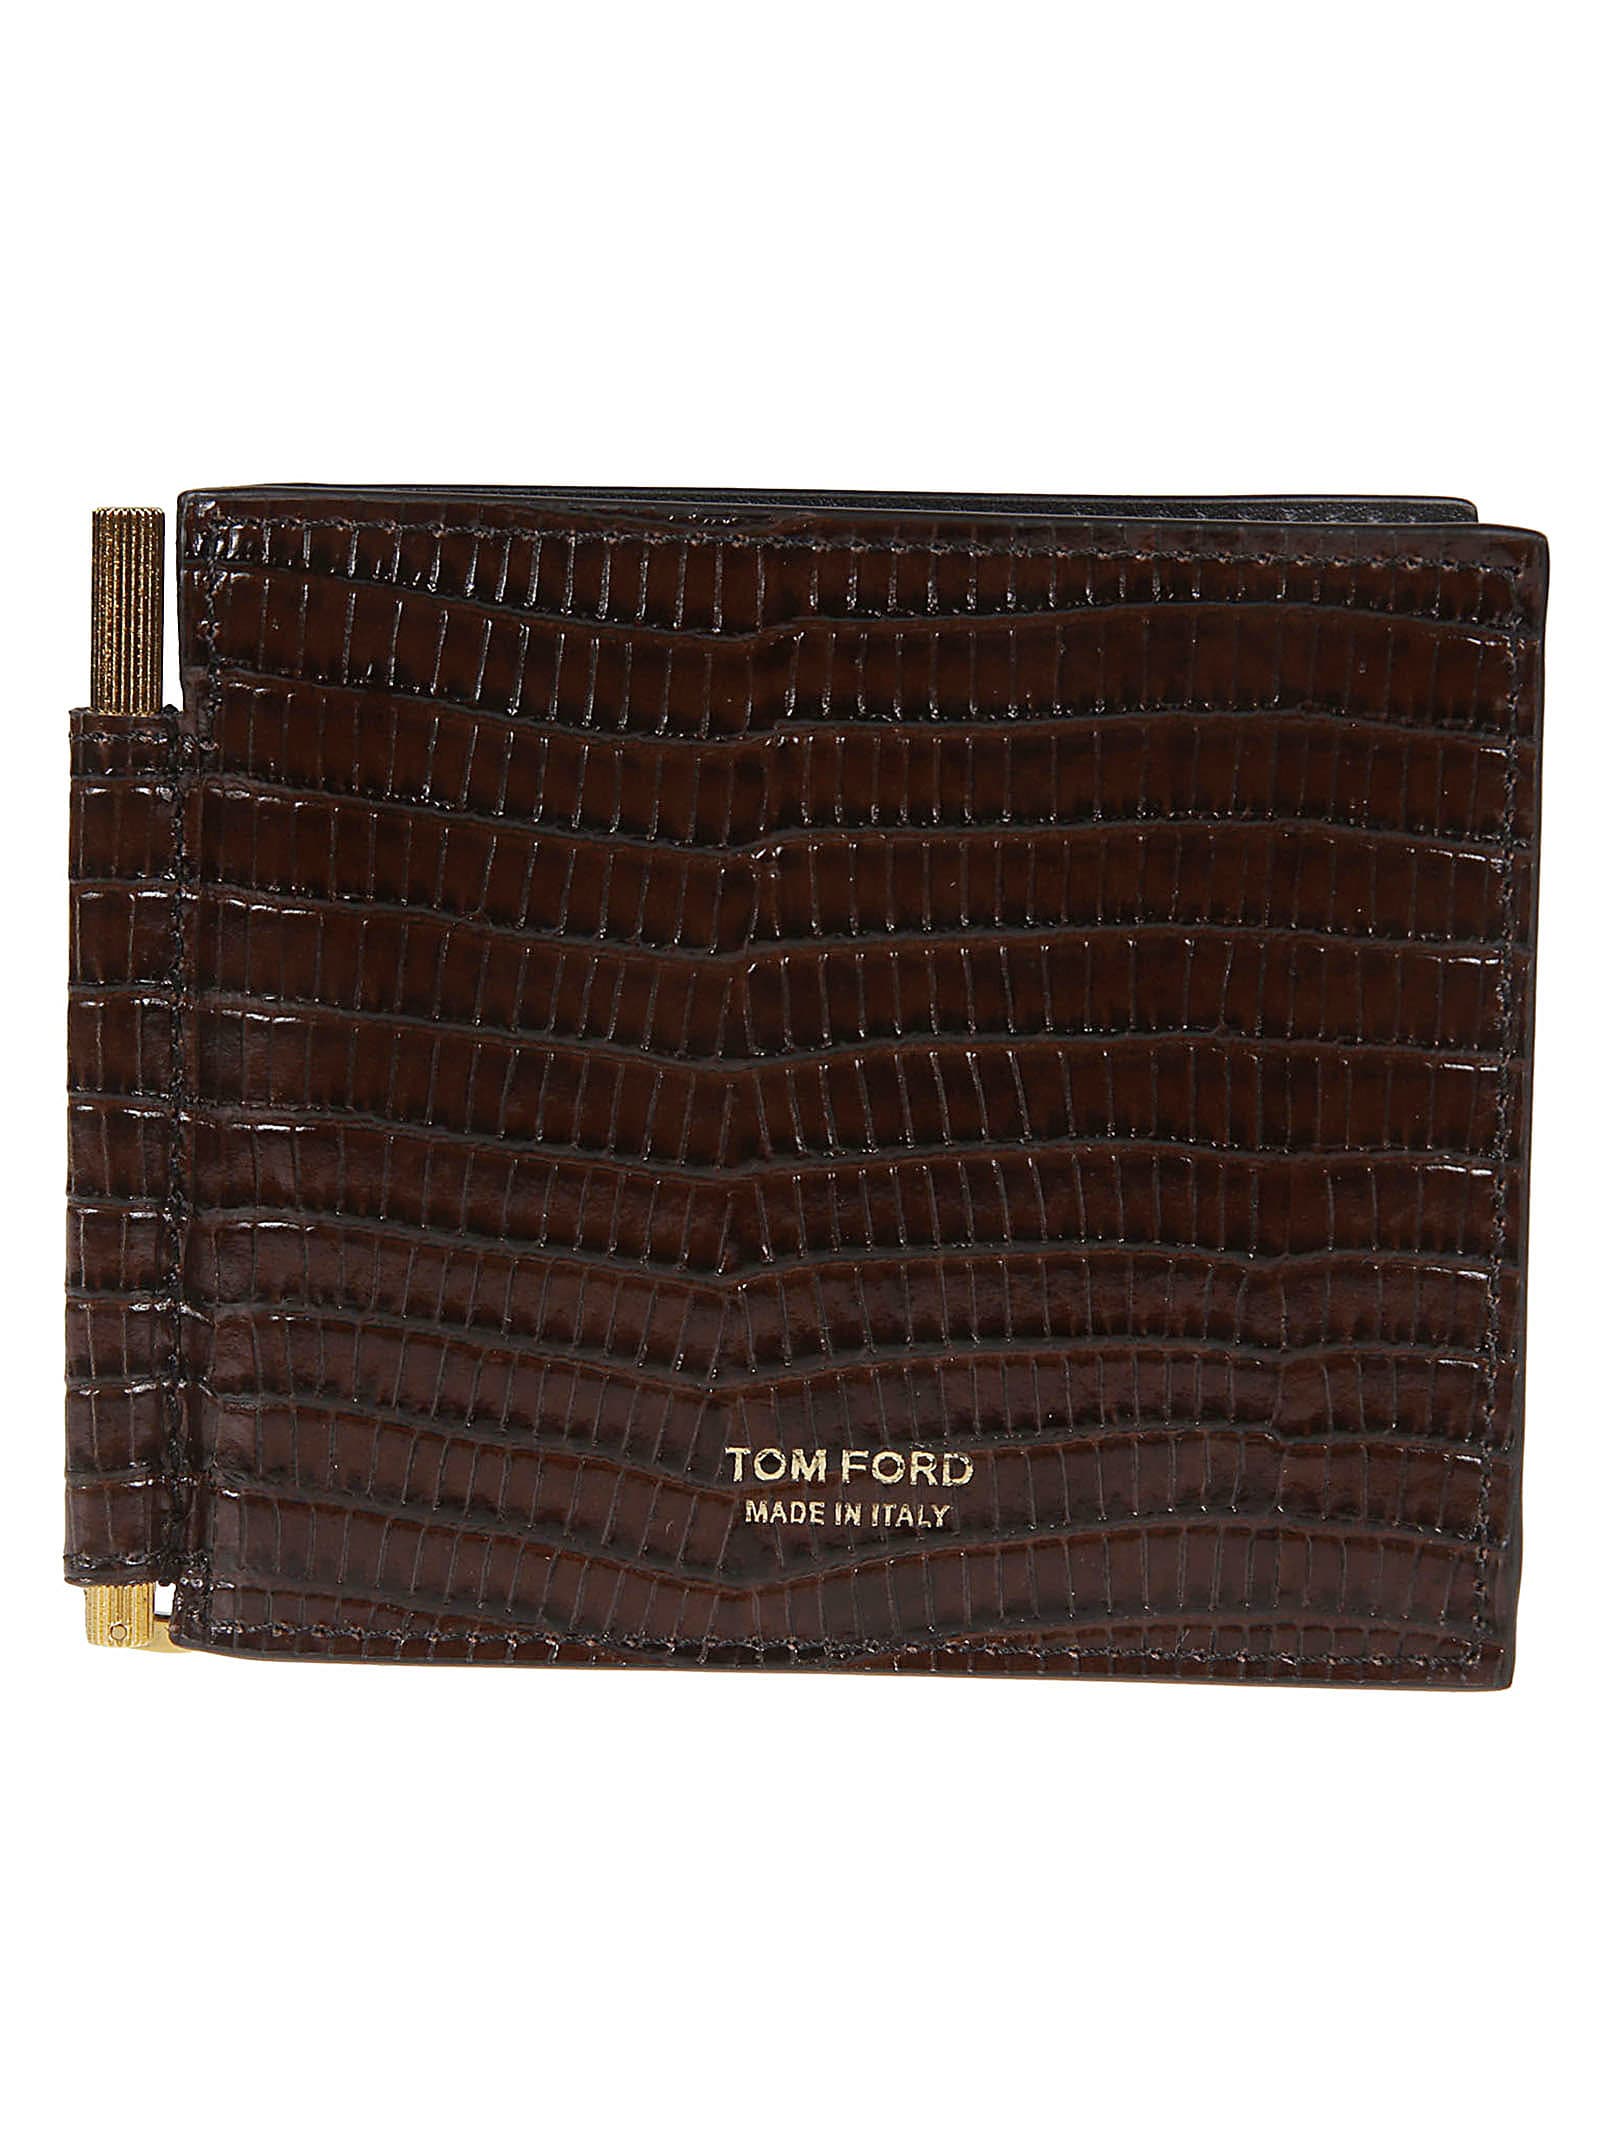 Tom Ford Printed Alligator Money Clip Wallet In Chicolate Brown